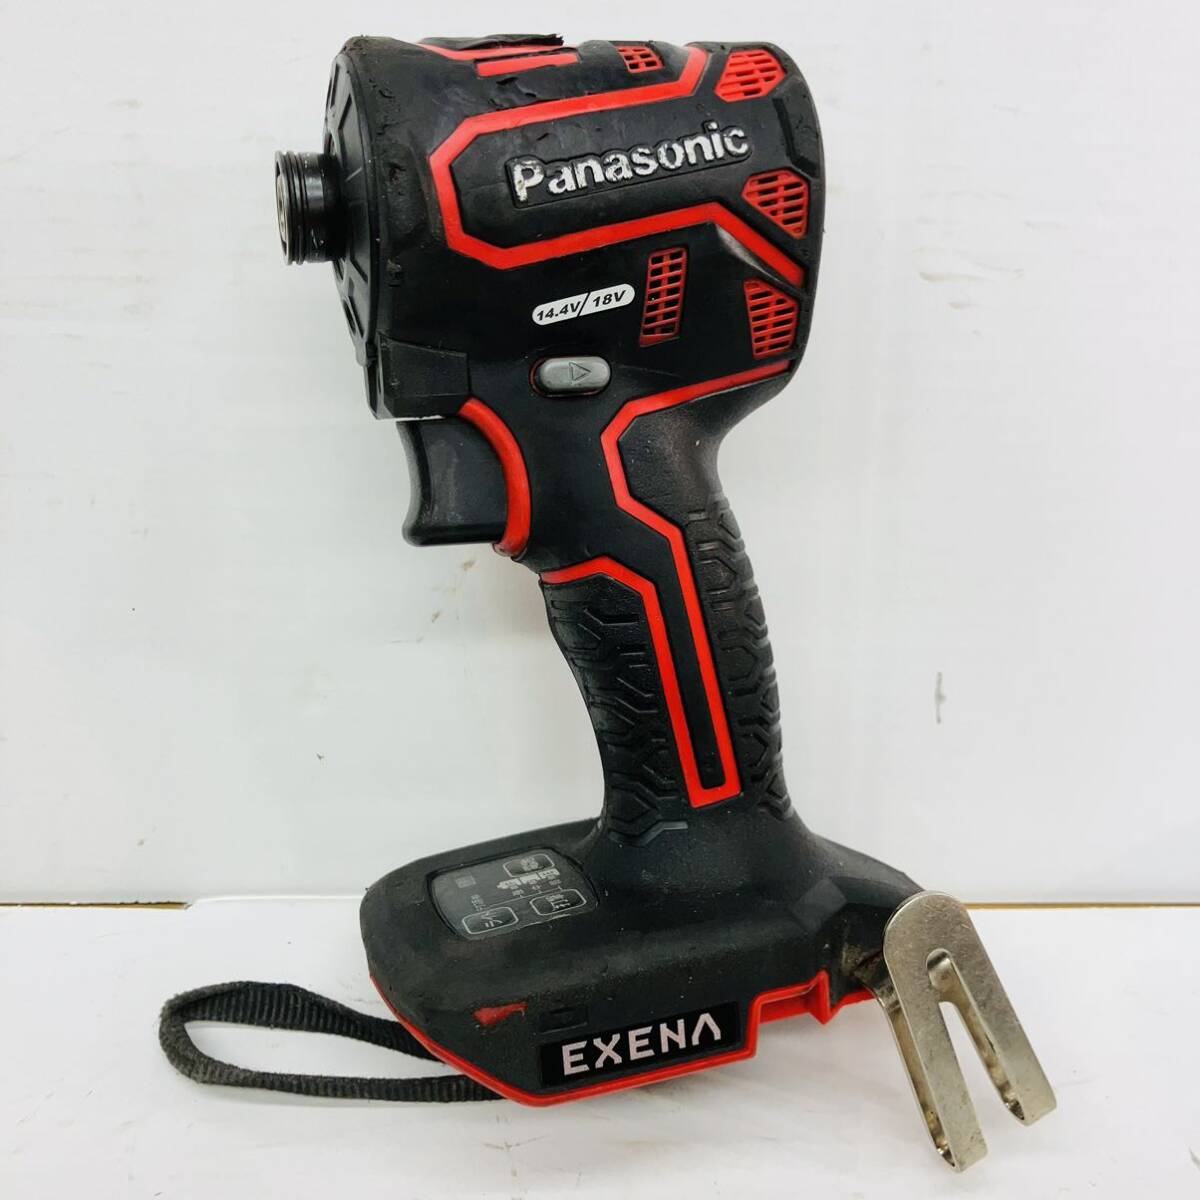  operation excellent free shipping Panasonic Panasonic 14.4v 18v rechargeable impact driver EXENA EZ1PD1 red body only 